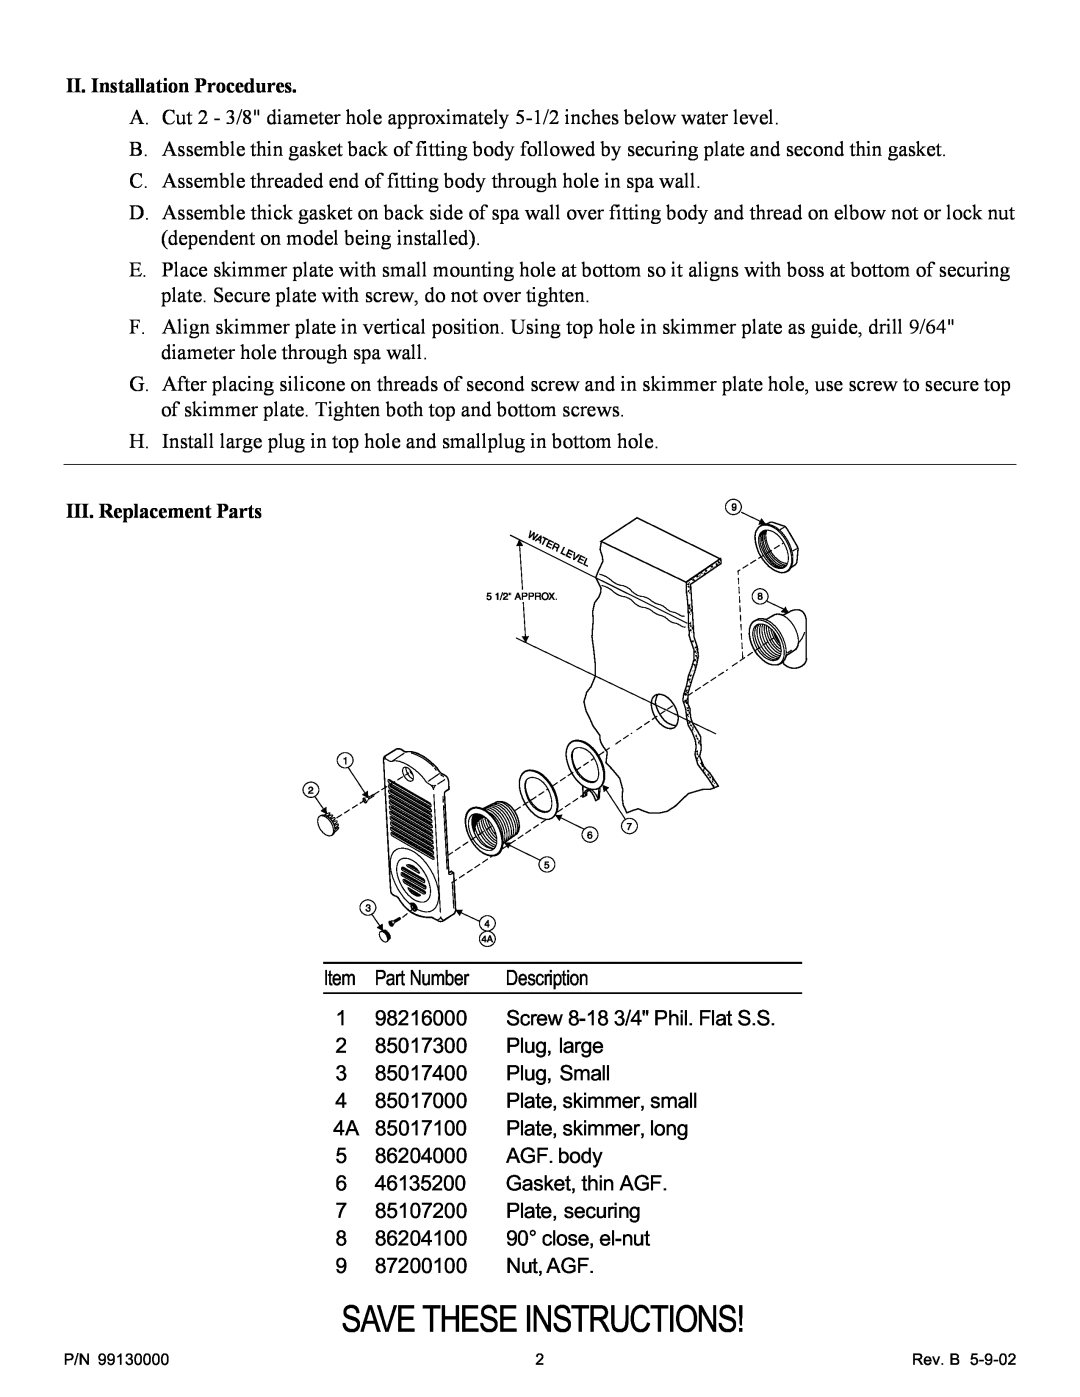 Pentair Hot Tub Skimmer II.Installation Procedures, III. Replacement Parts, Save These Instructions 